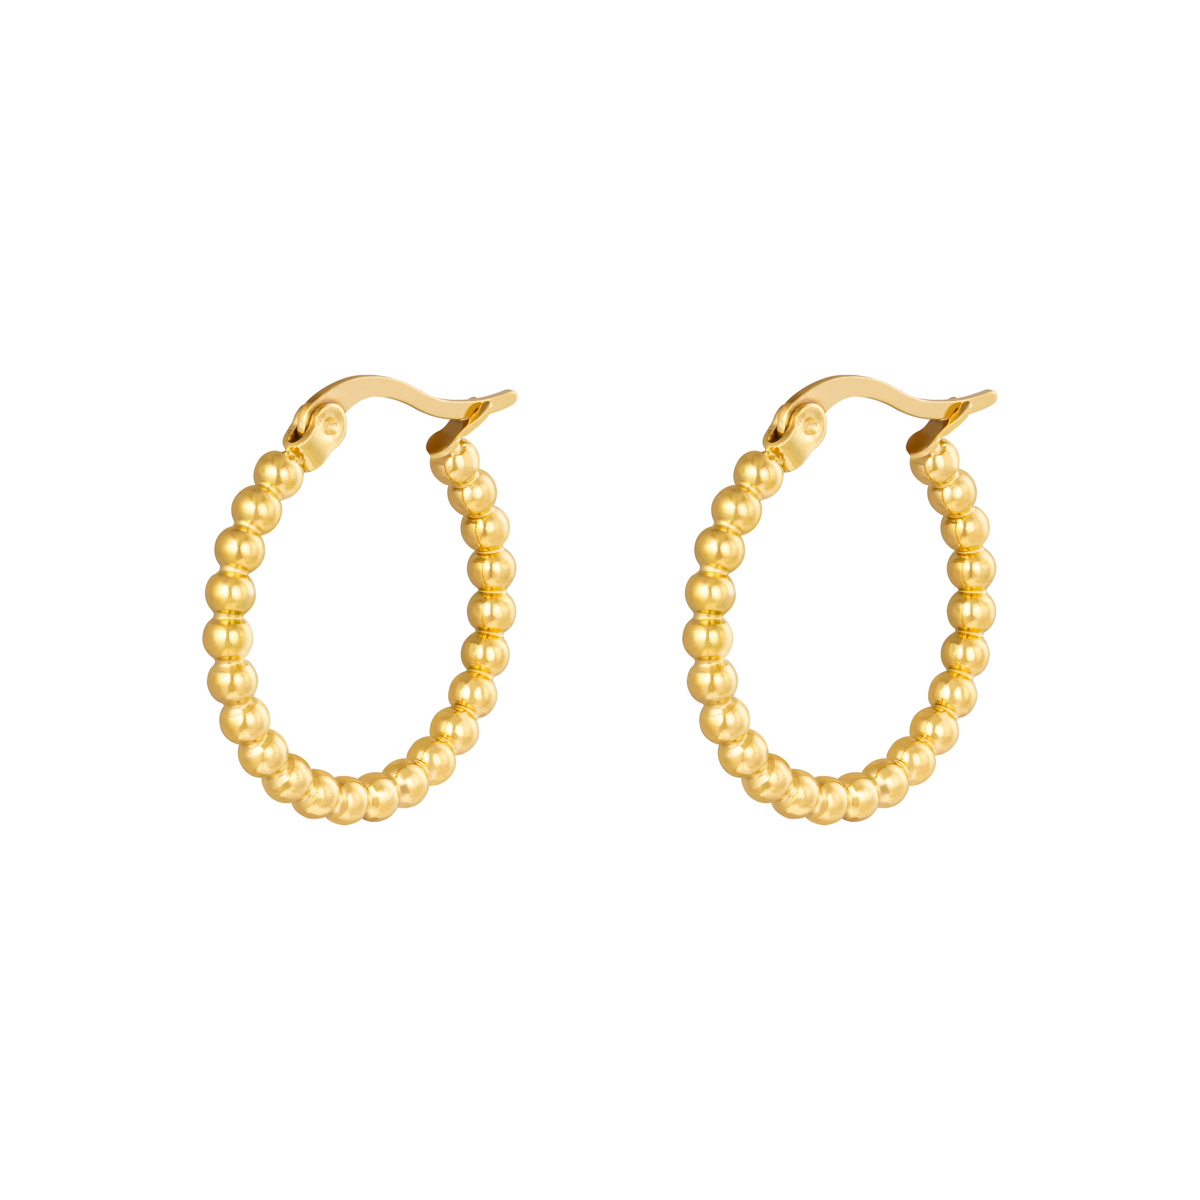 Or / Boucles d'oreilles Hoops Spheres 22 mm (Pack with plastic bag) 